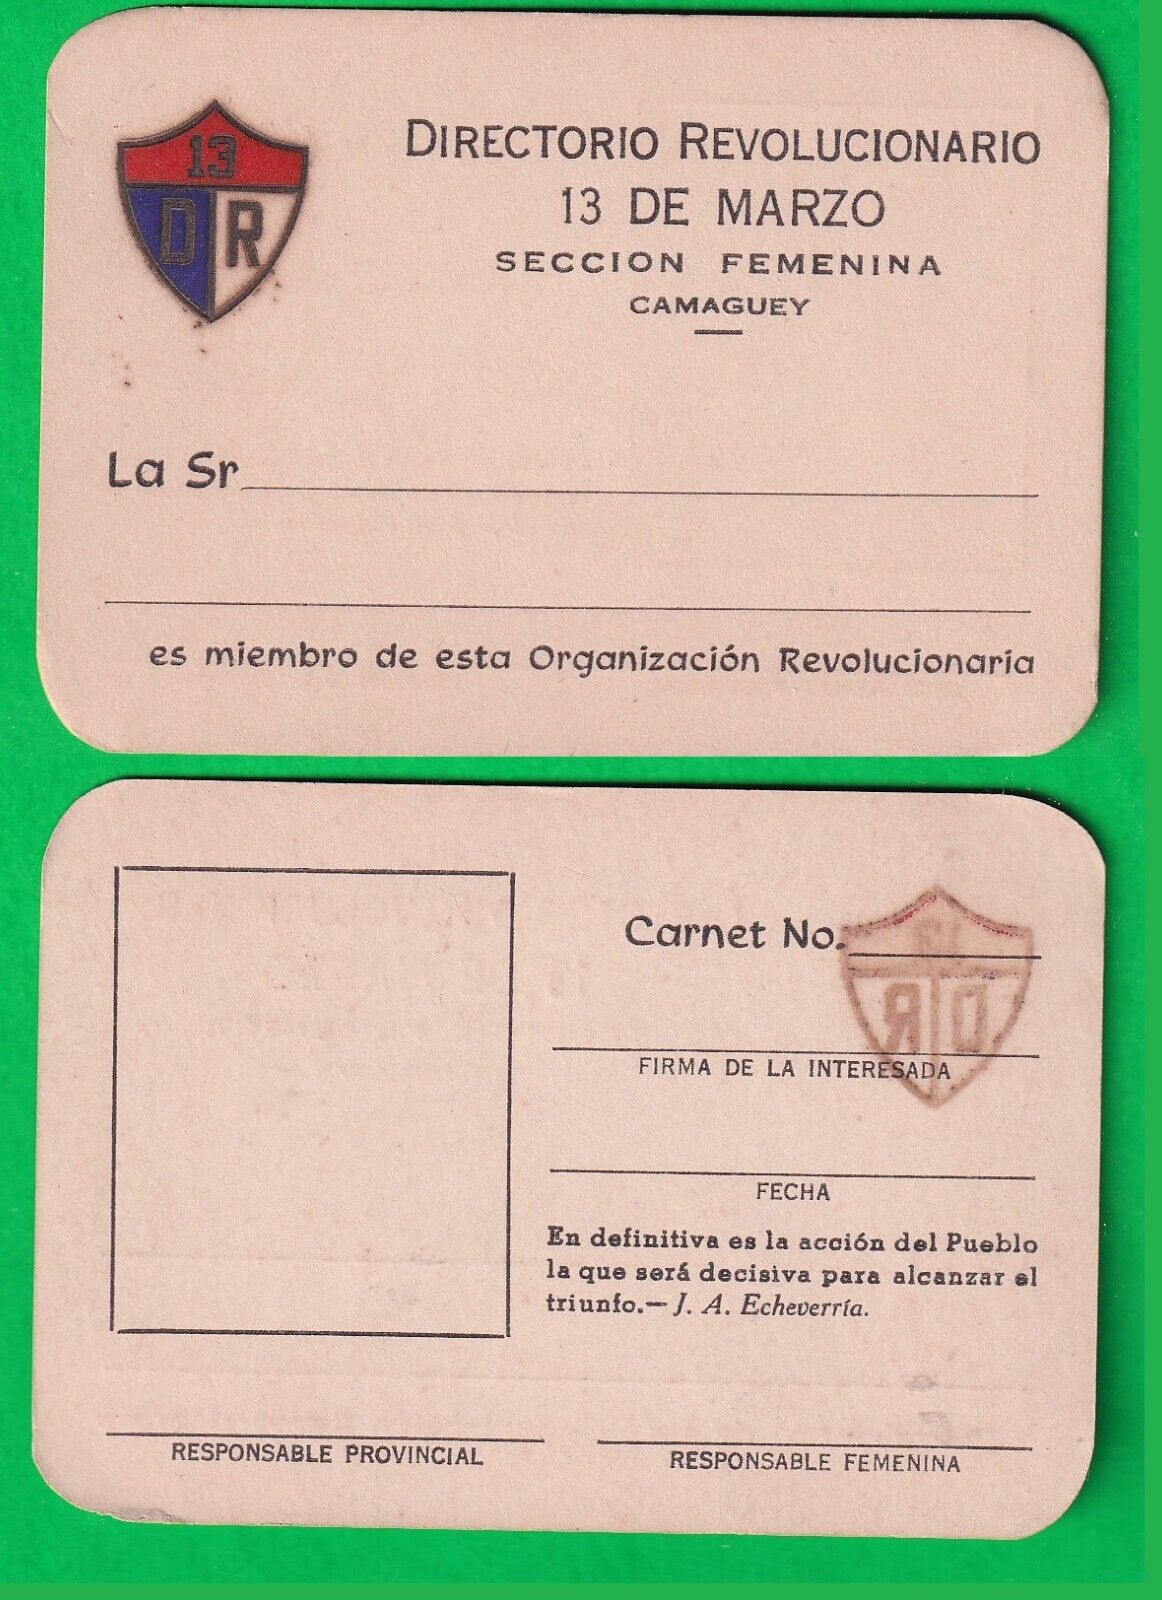 Cuba women\'s section member card of Revolutionary Directory March 13, 1959